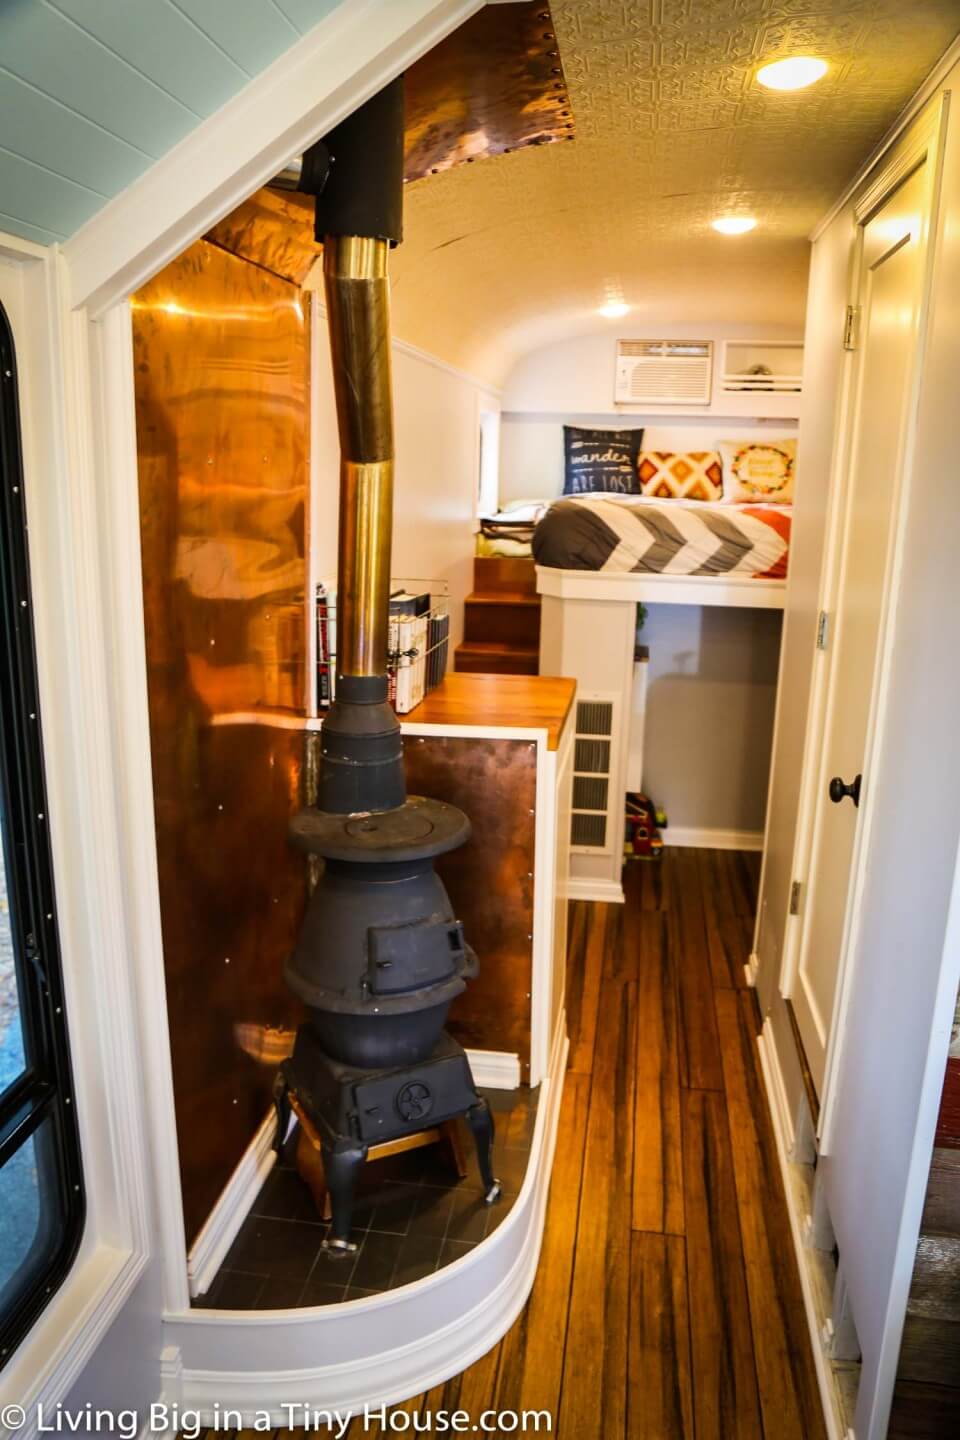 Living Big in a Tiny House - School Bus Converted To Incredible Off ...